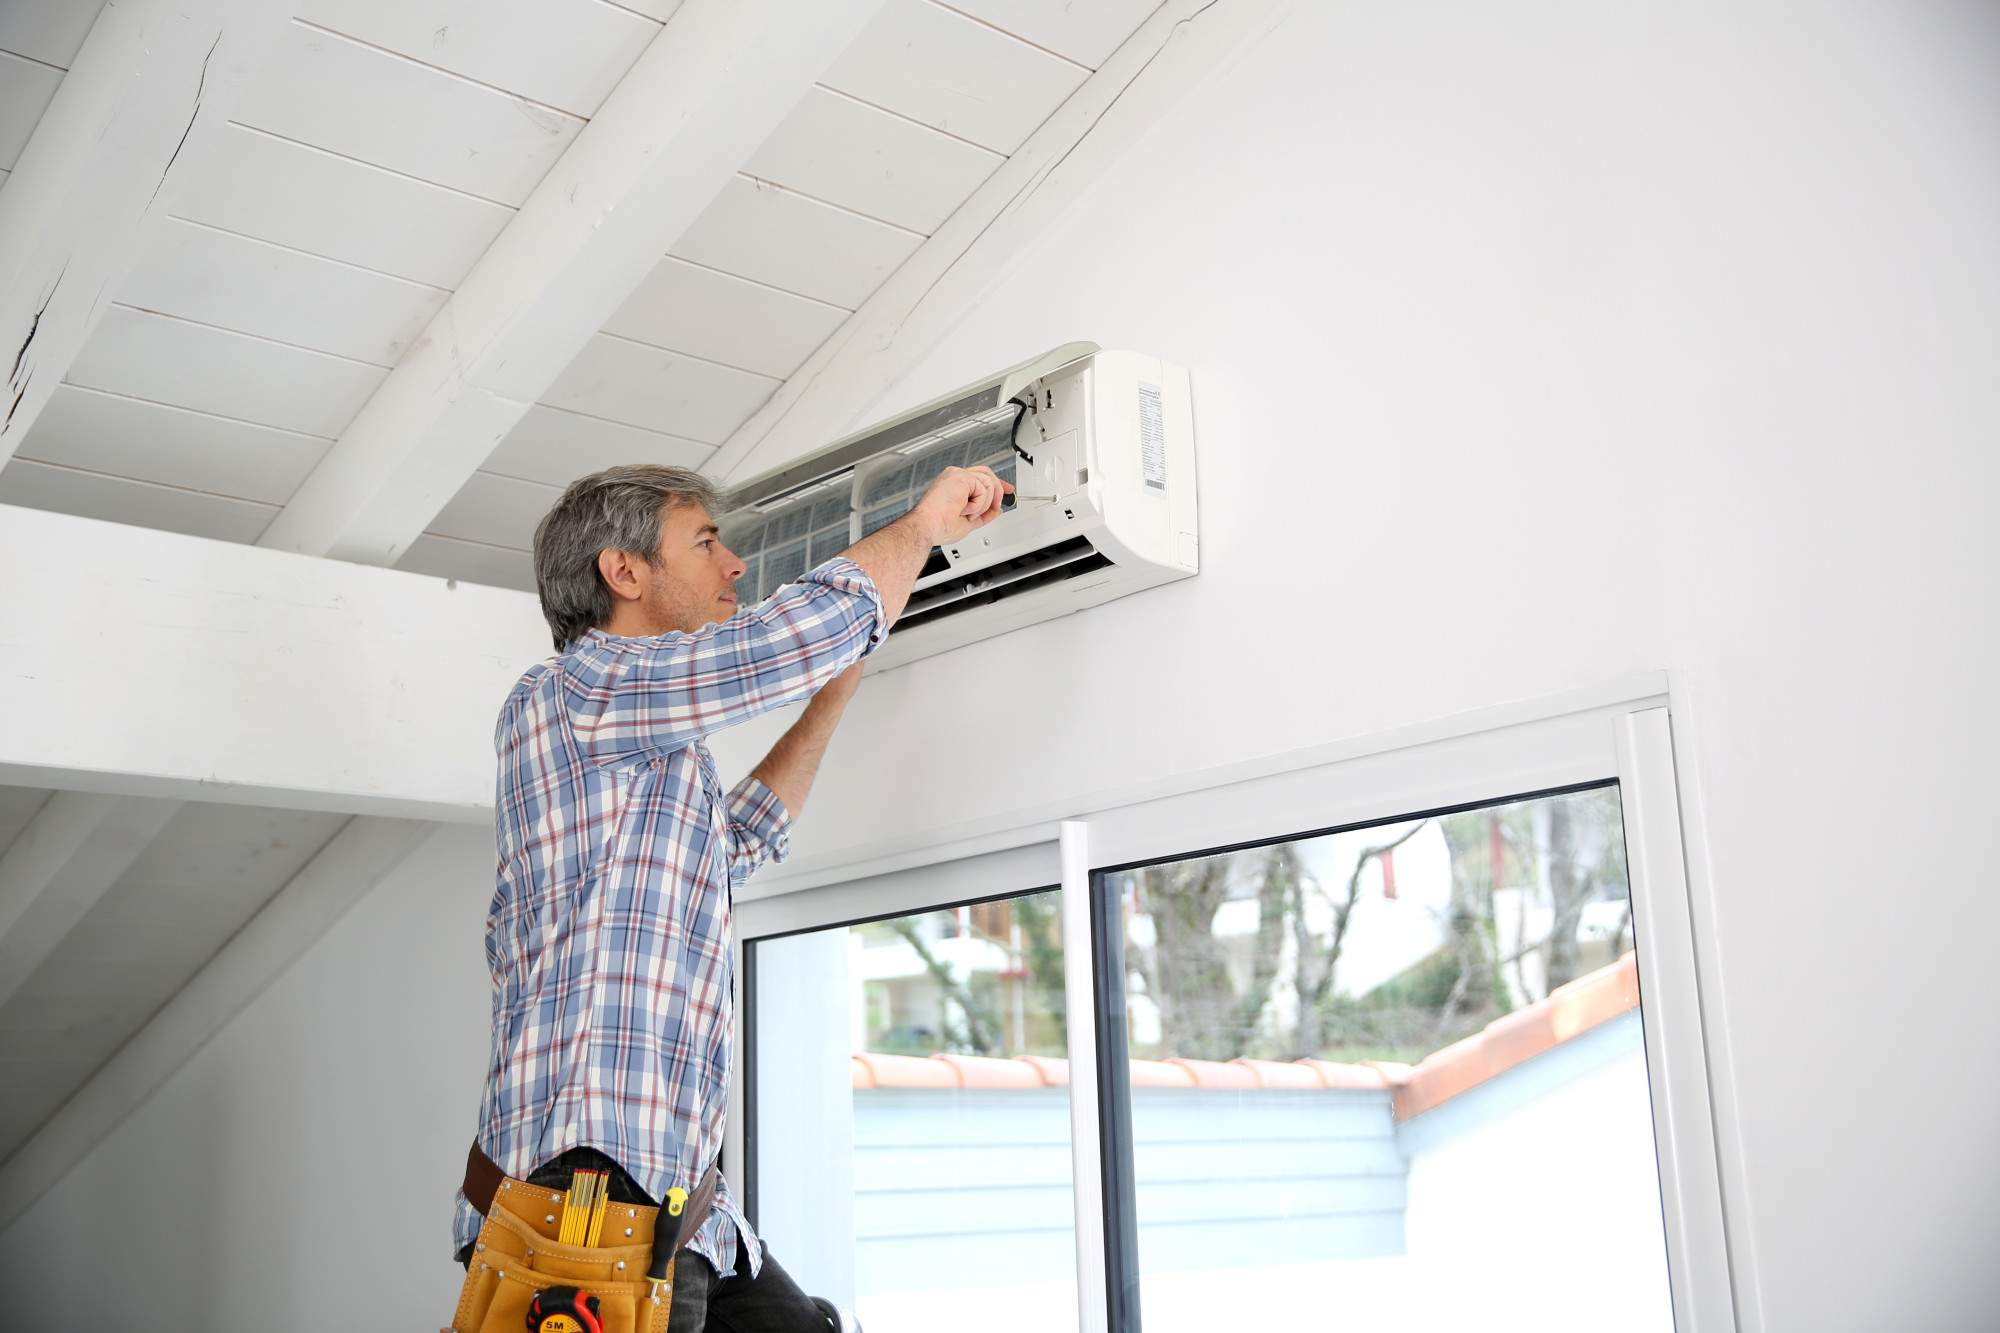 3 Sure Signs It’s Time to Hire an HVAC Technician